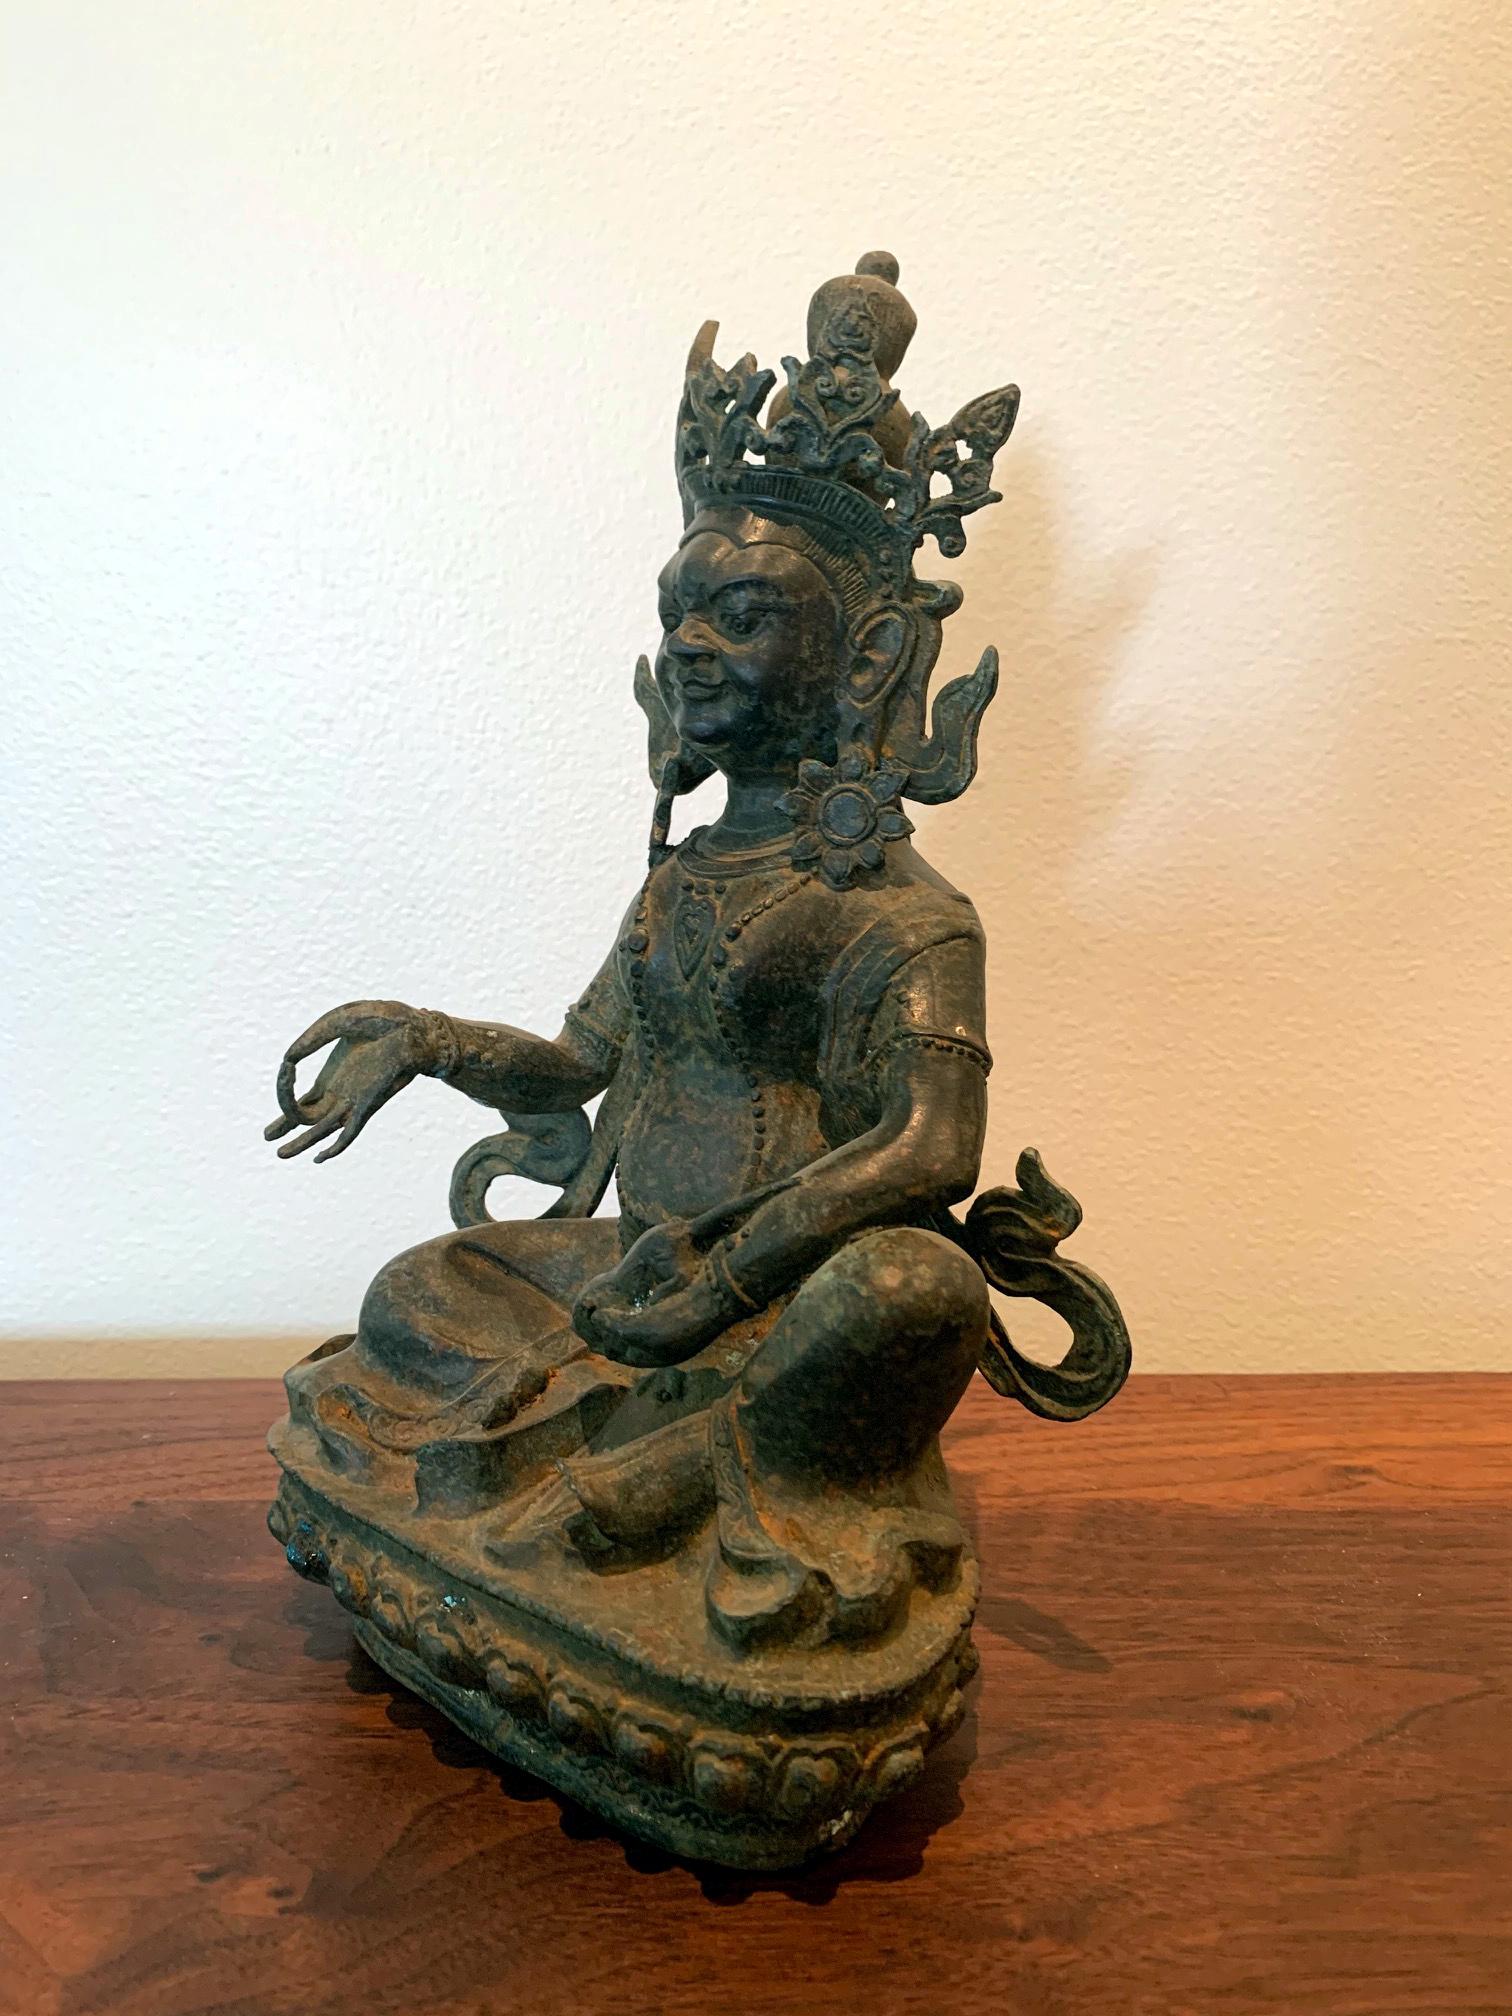 The cast bronze statue depicts a Lokapala named Vaisravana, one of the four Heavenly Kings. In Tibetan Buddhism, he is also known as Jambhala, or 